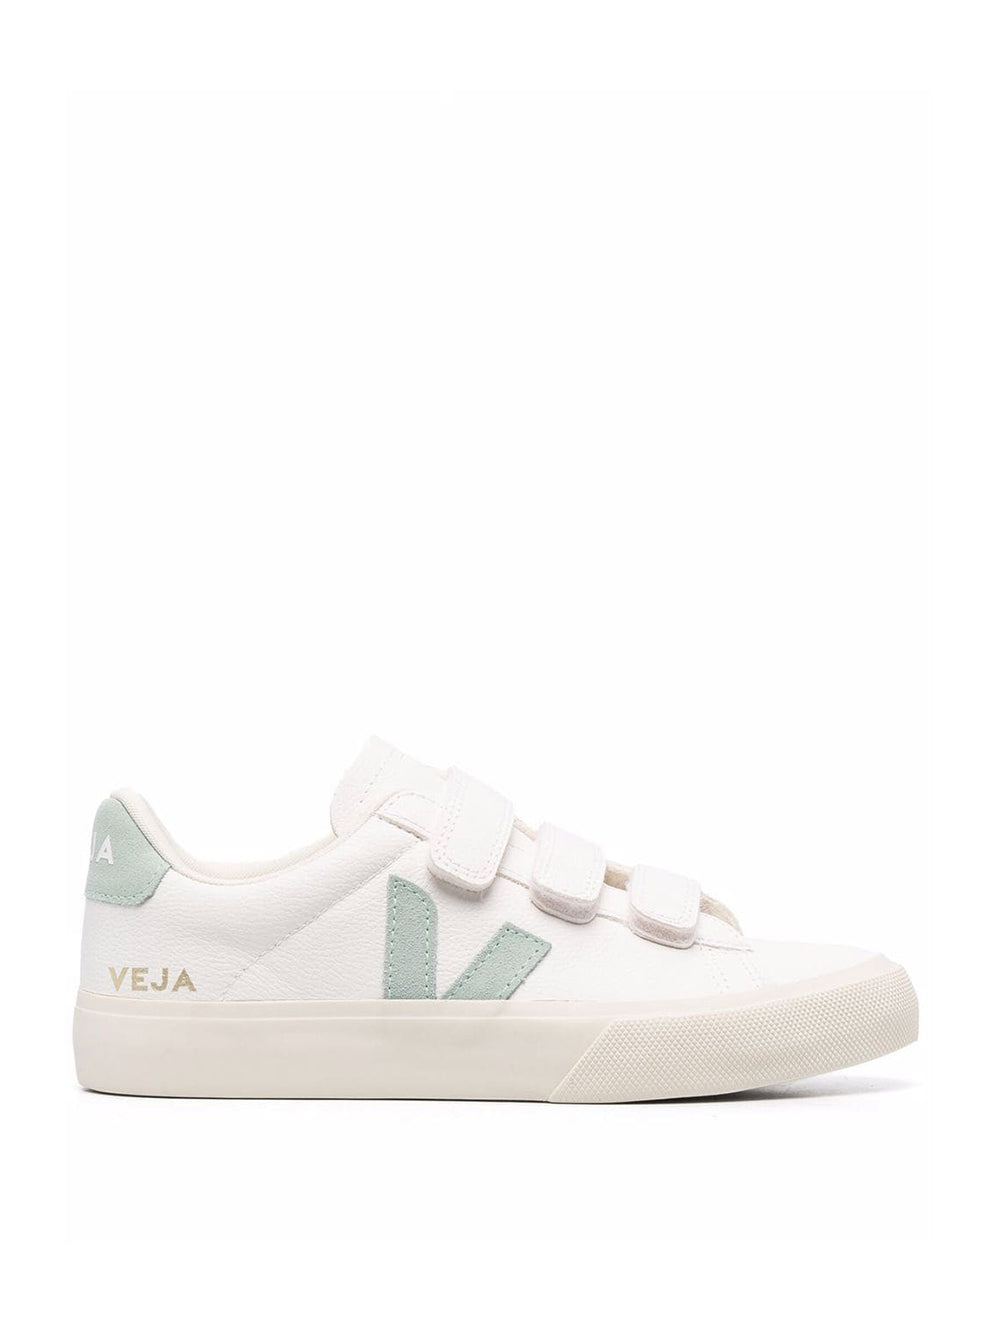 White Recife Sneakers With Matcha Details